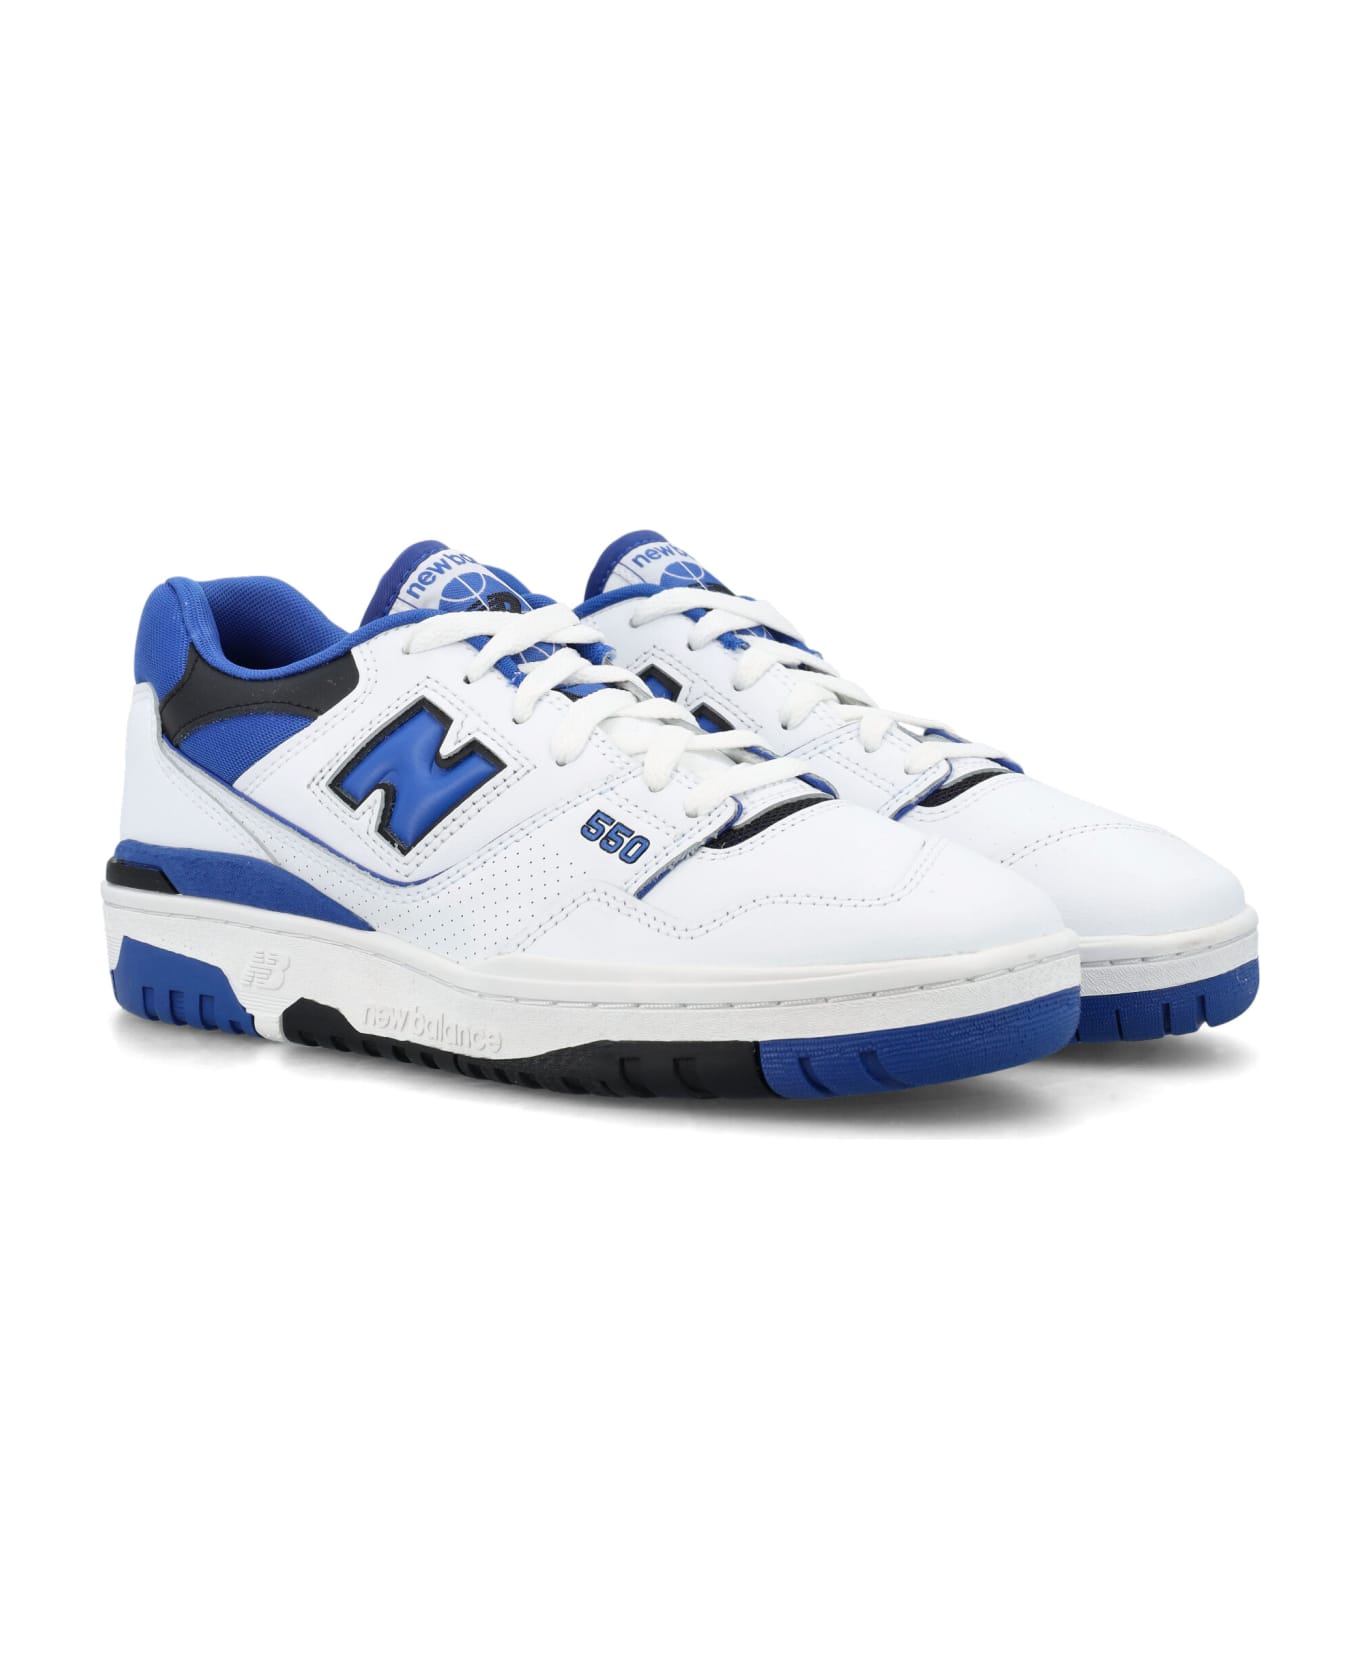 New Balance 550 Low Top Sneakers - WHITE/ROYAL